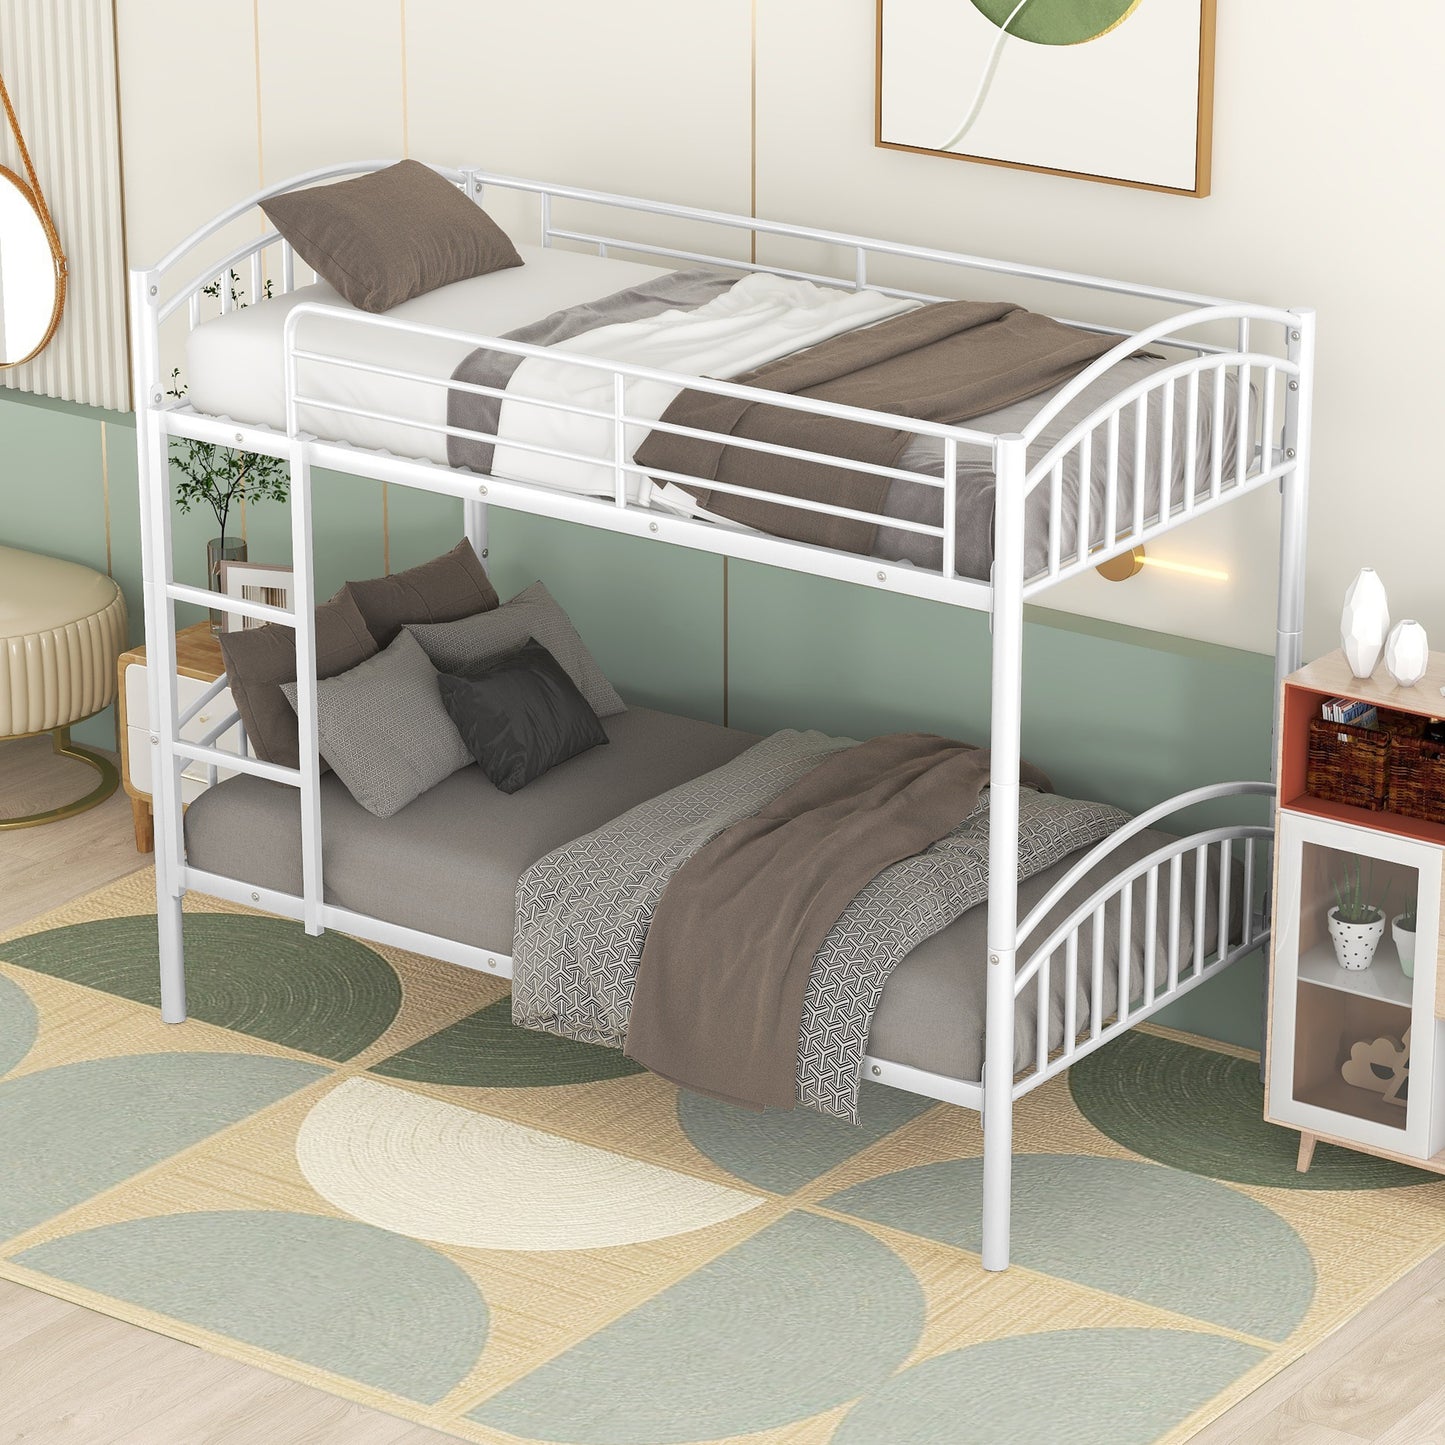 BTMWAY Twin Over Twin Metal Bunk Bed, Heavy Duty Twin Bunk Beds for Kids Teens Adults, Divided into Two Beds No Box Spring Needed, Bunk Bed Twin Over Twin with Guardrails, Ladder, White